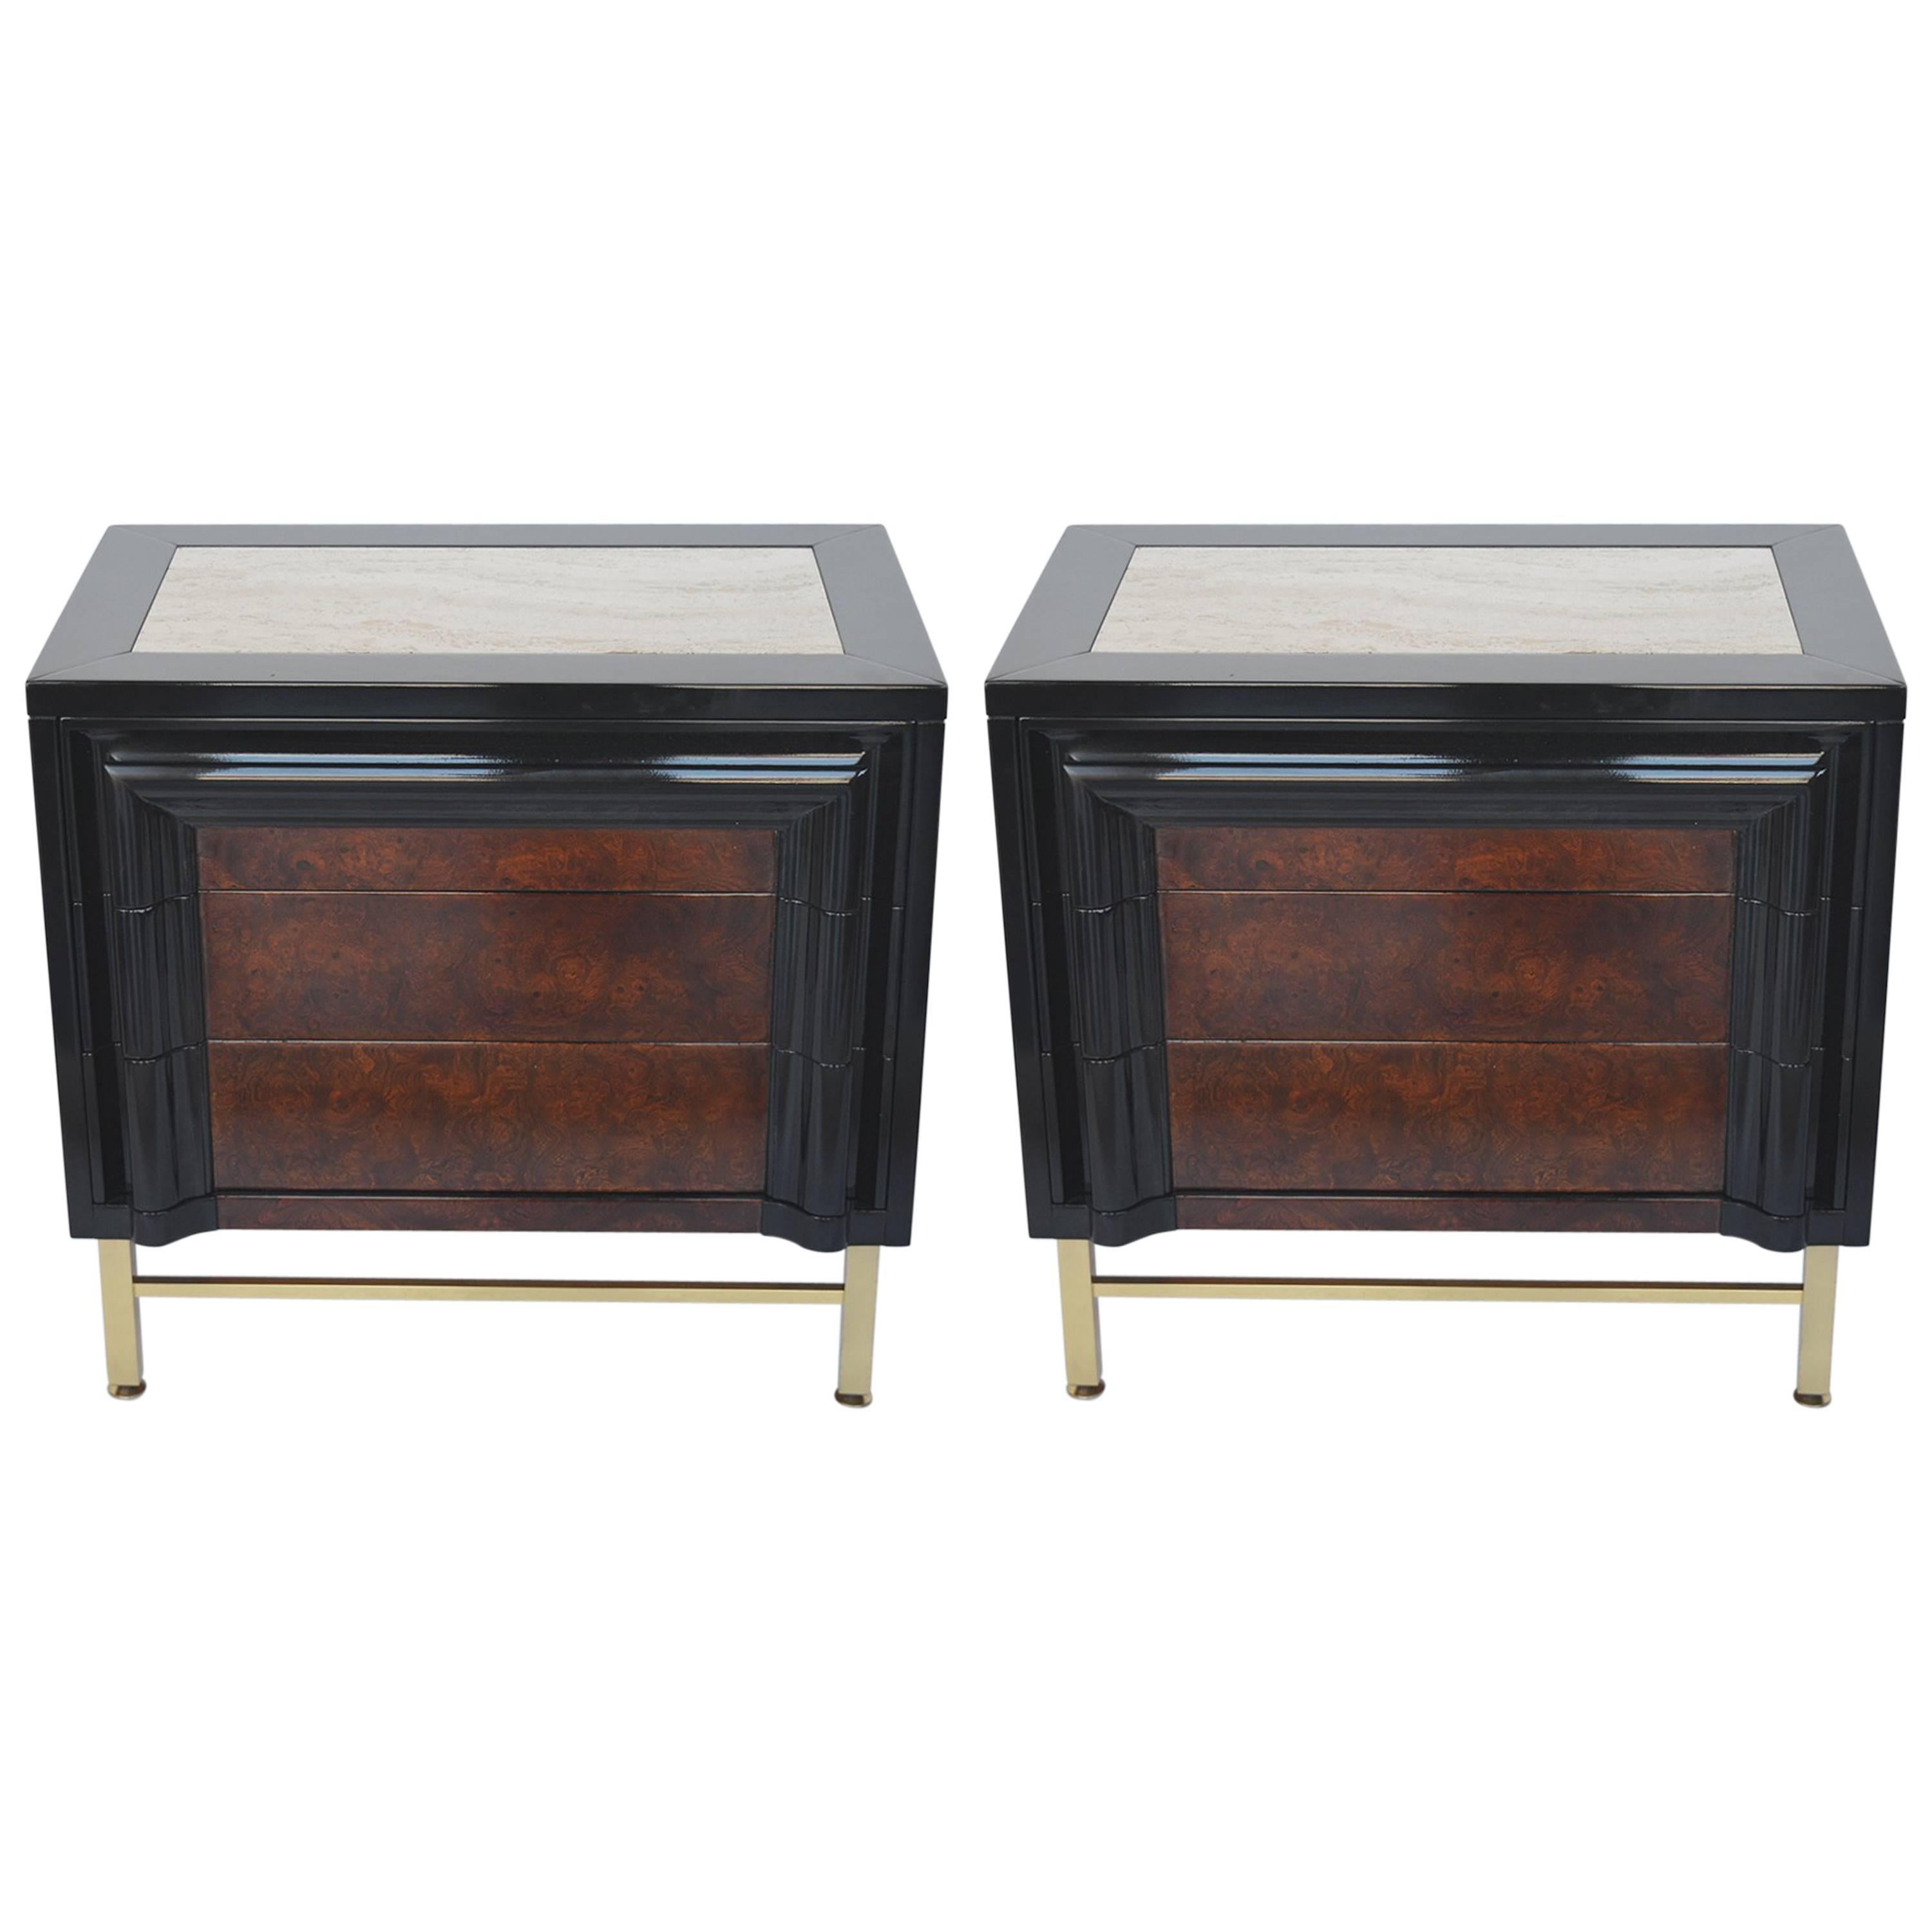 Pair of Italian Side Tables with Travertine Tops